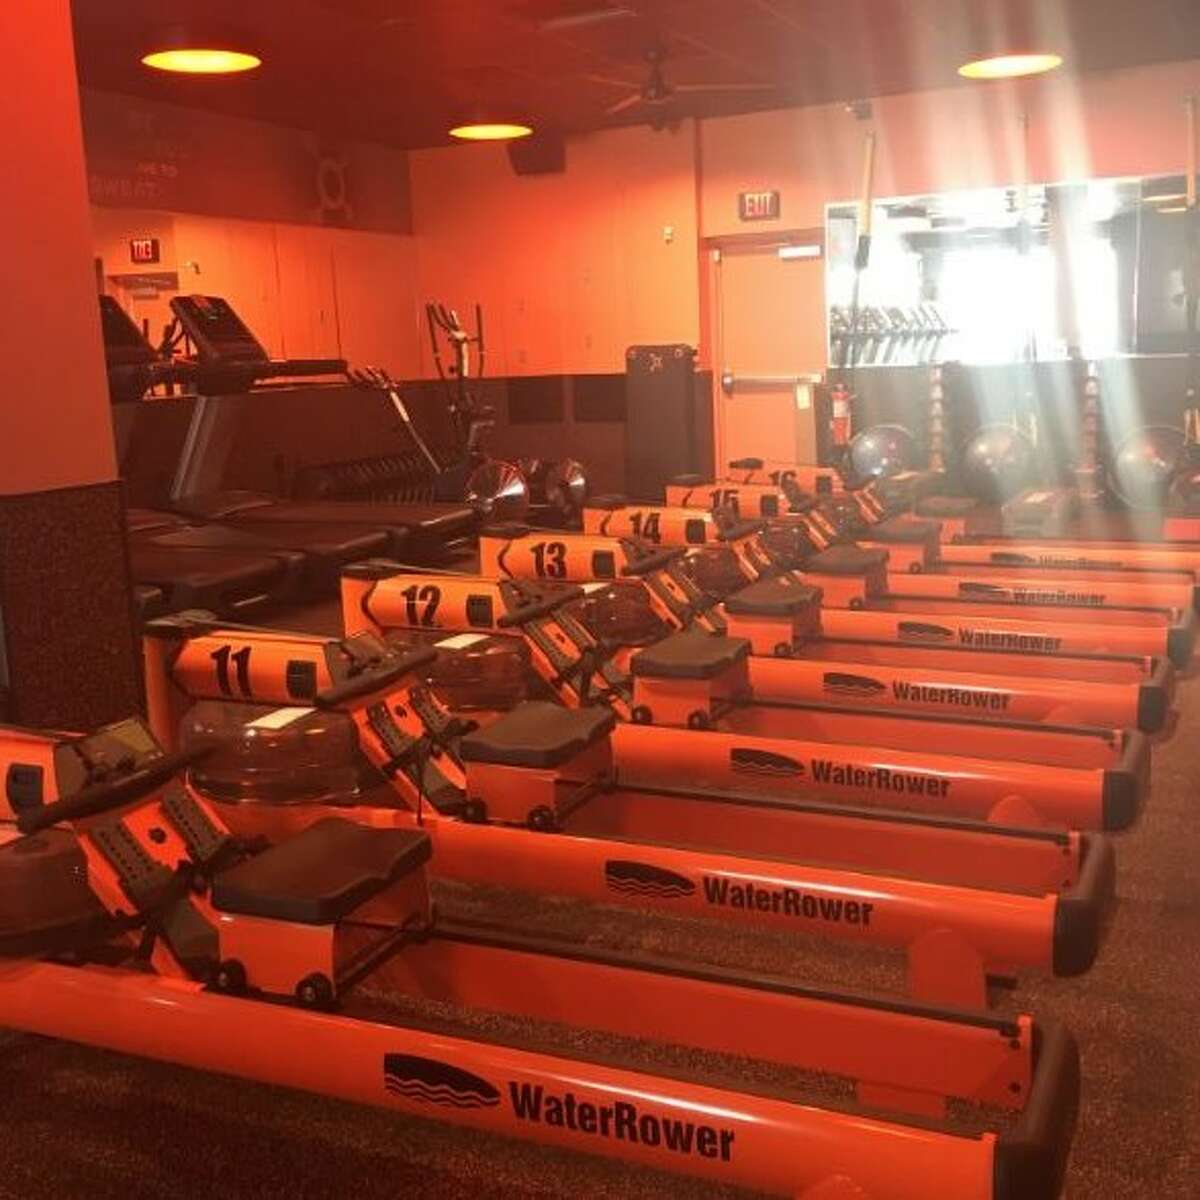 The 10th Houston-area Orangetheory Fitness studio opened in Webster in December 2017.